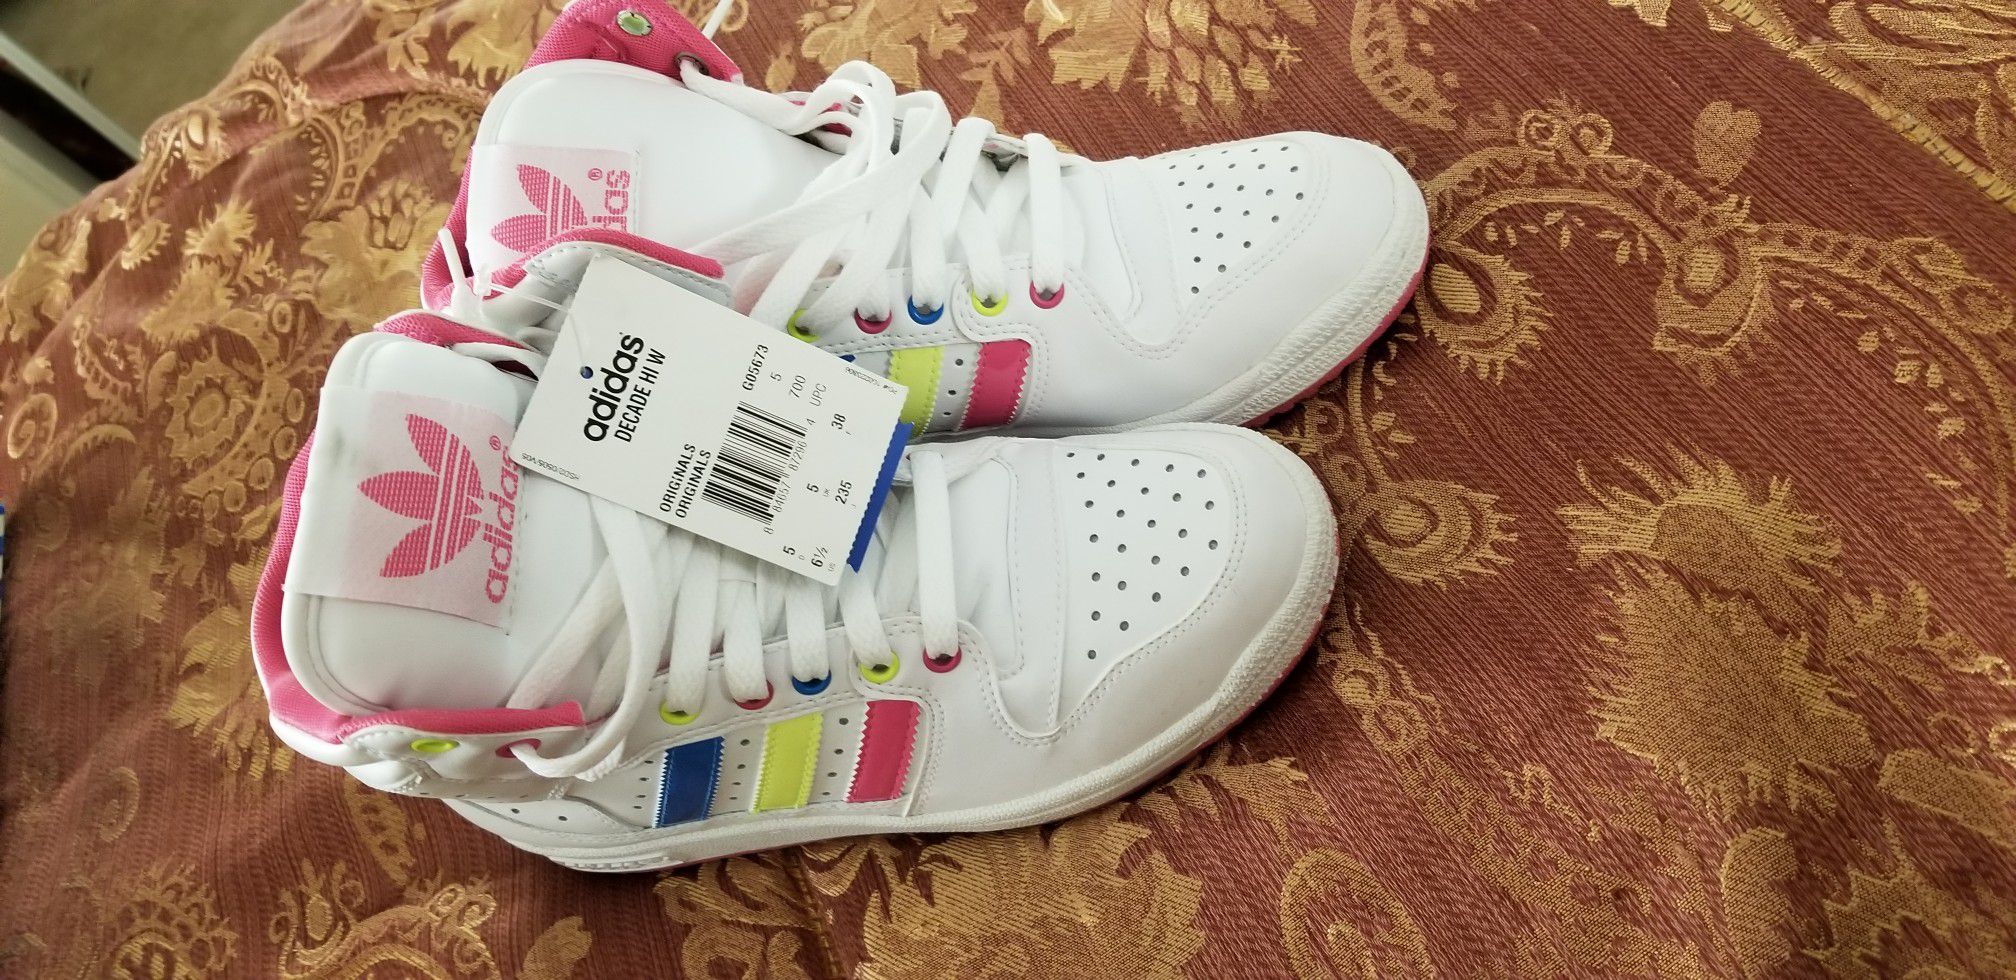 Womens Adidas size 6.5 tennis shoes